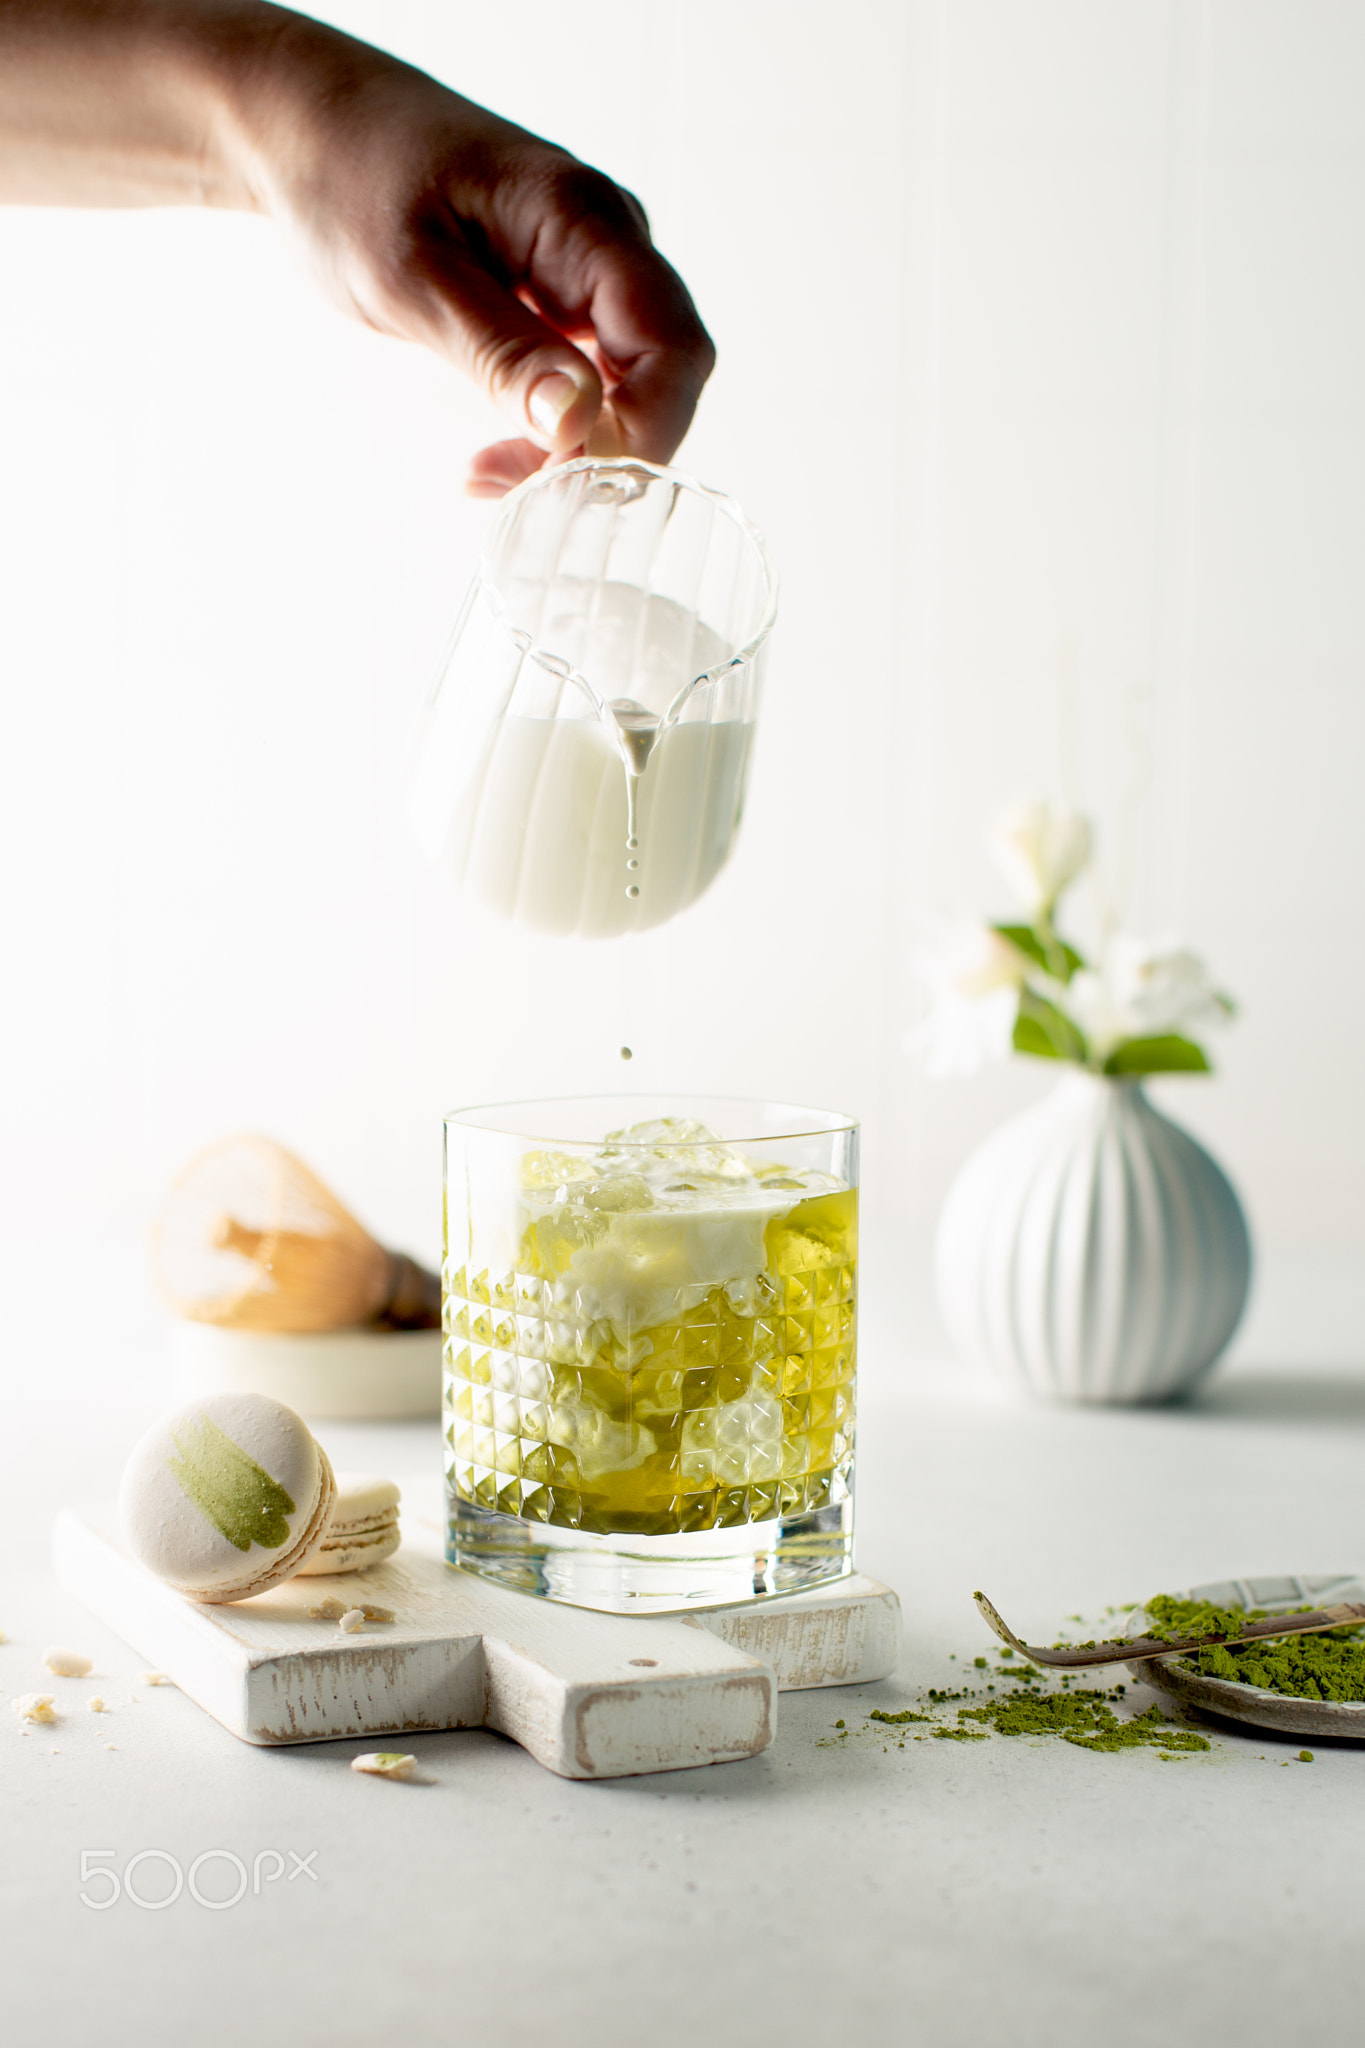 Iced green Matcha tea with pouring milk in glass,sweet macaroon and